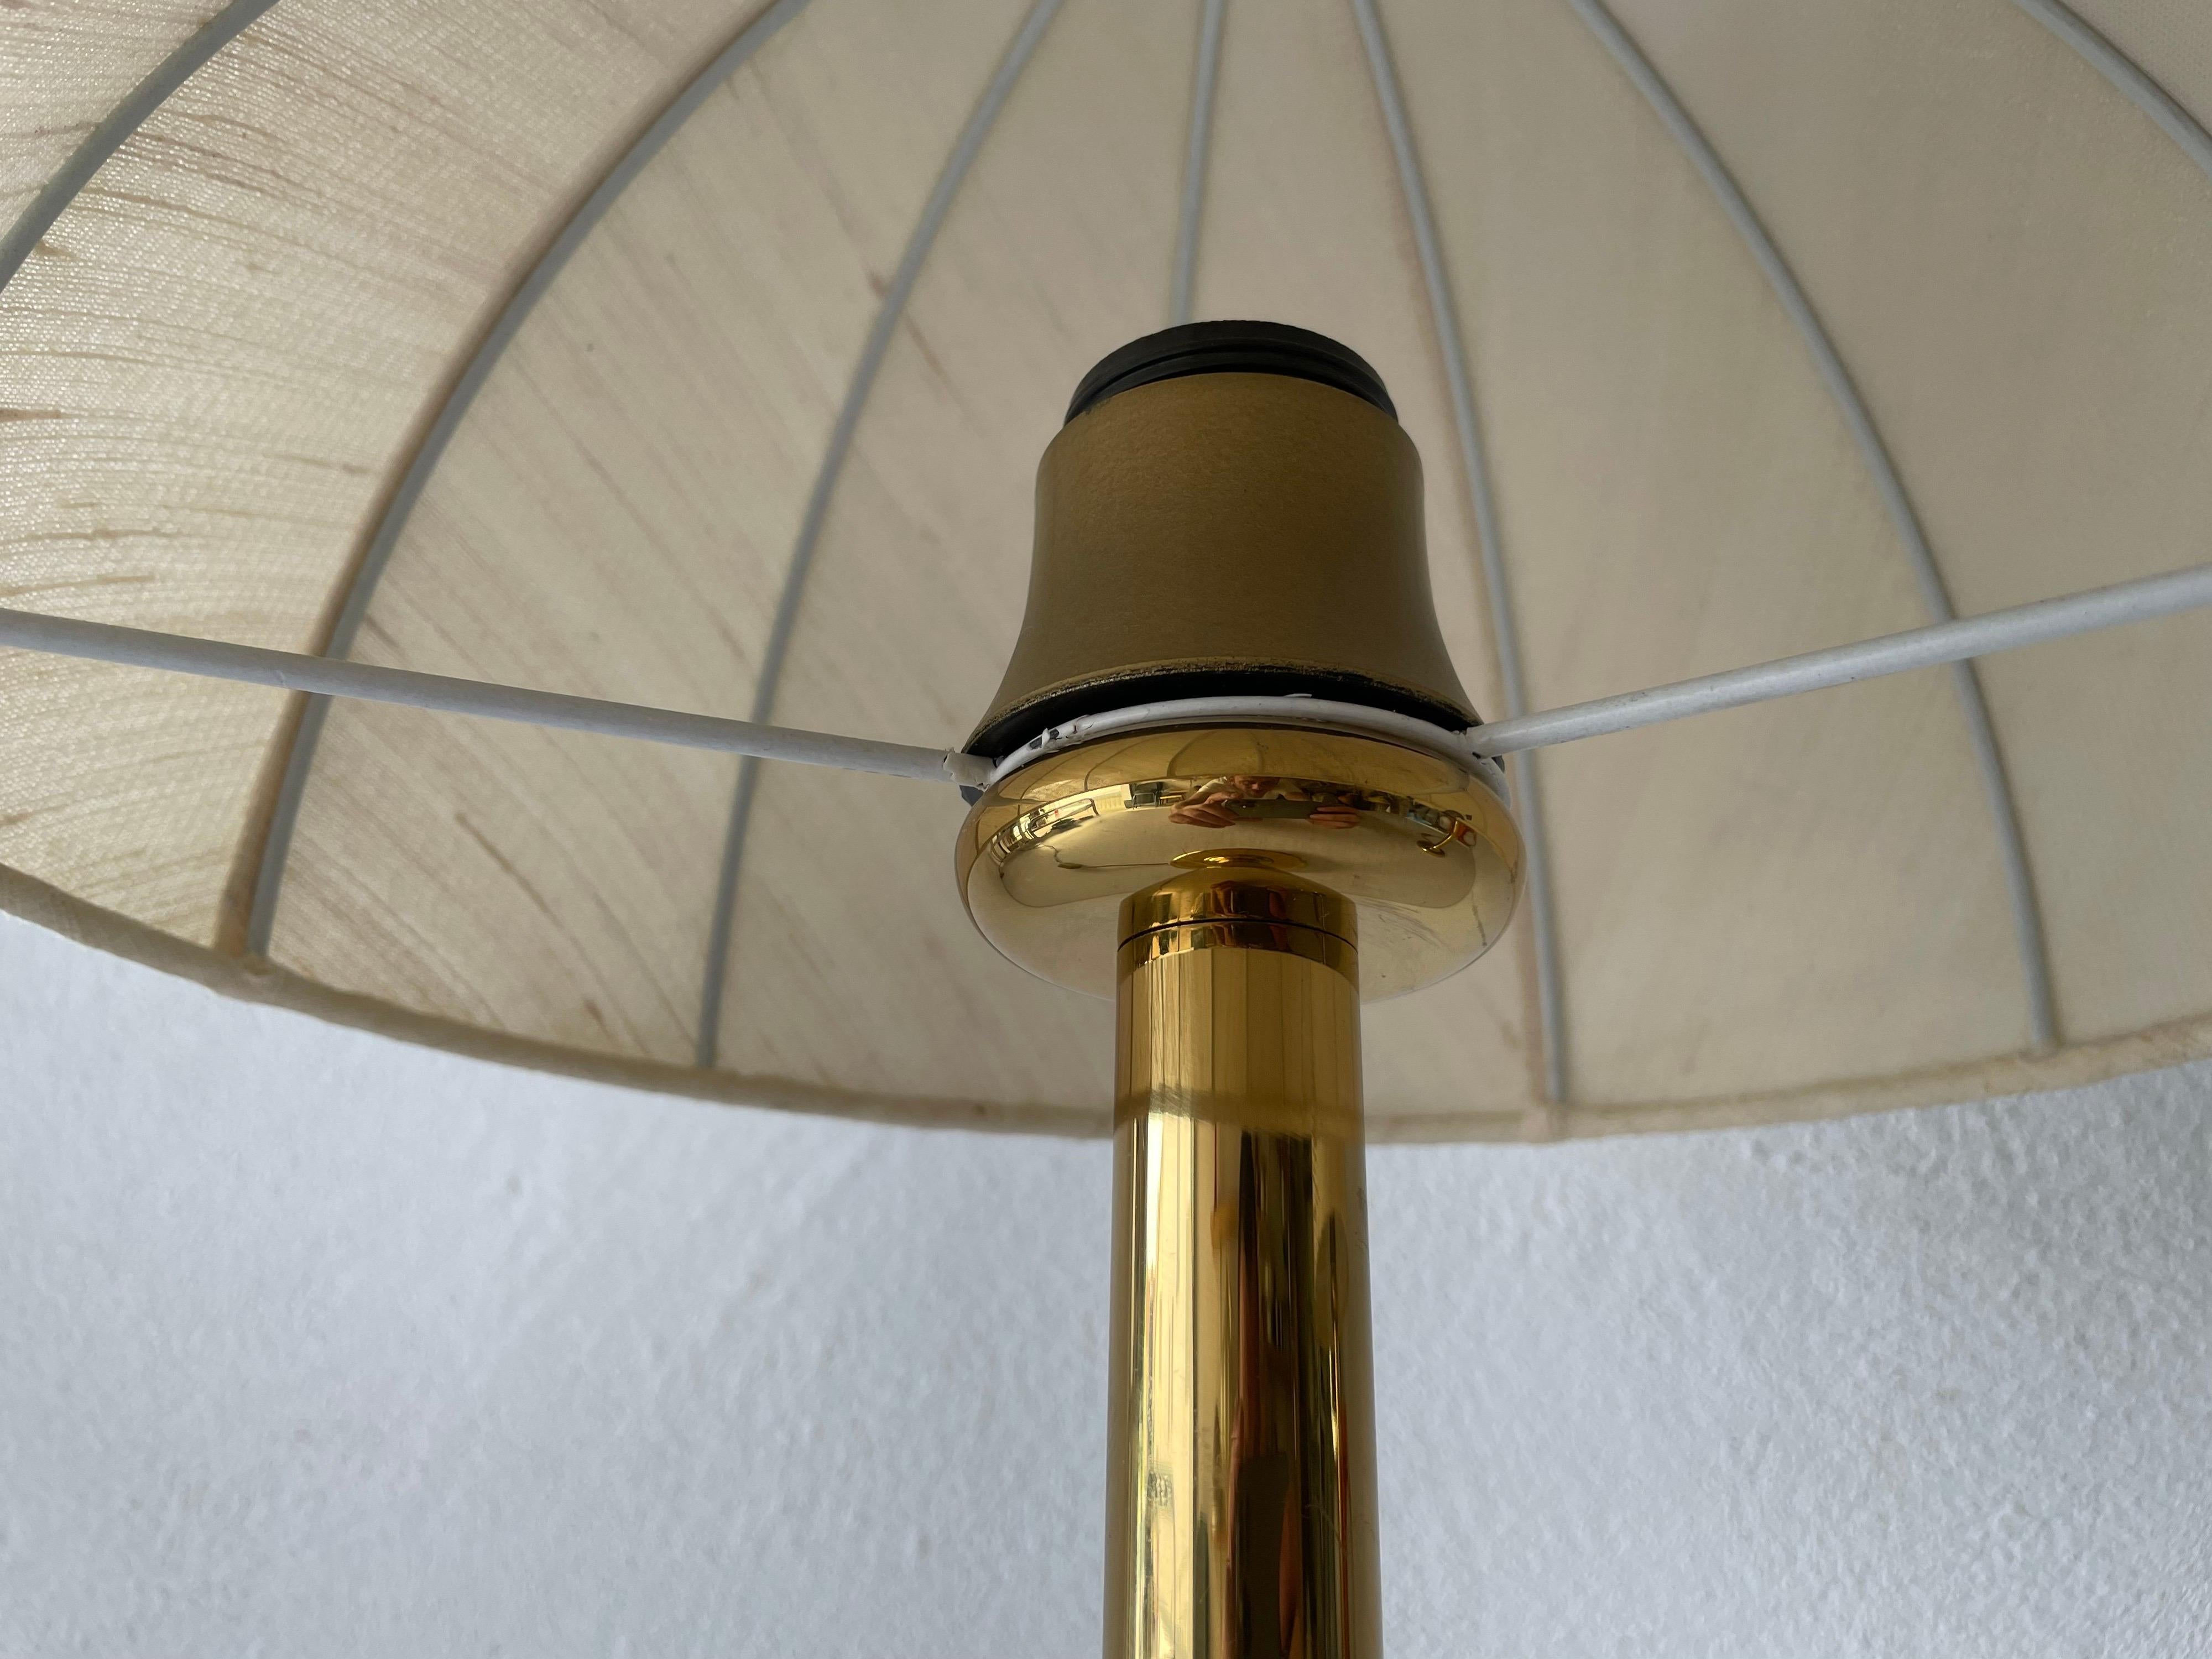 Metal Fabric Shade & Brass Body Elegant Pair of Bedside Lamps by ERU, 1980s, Germany